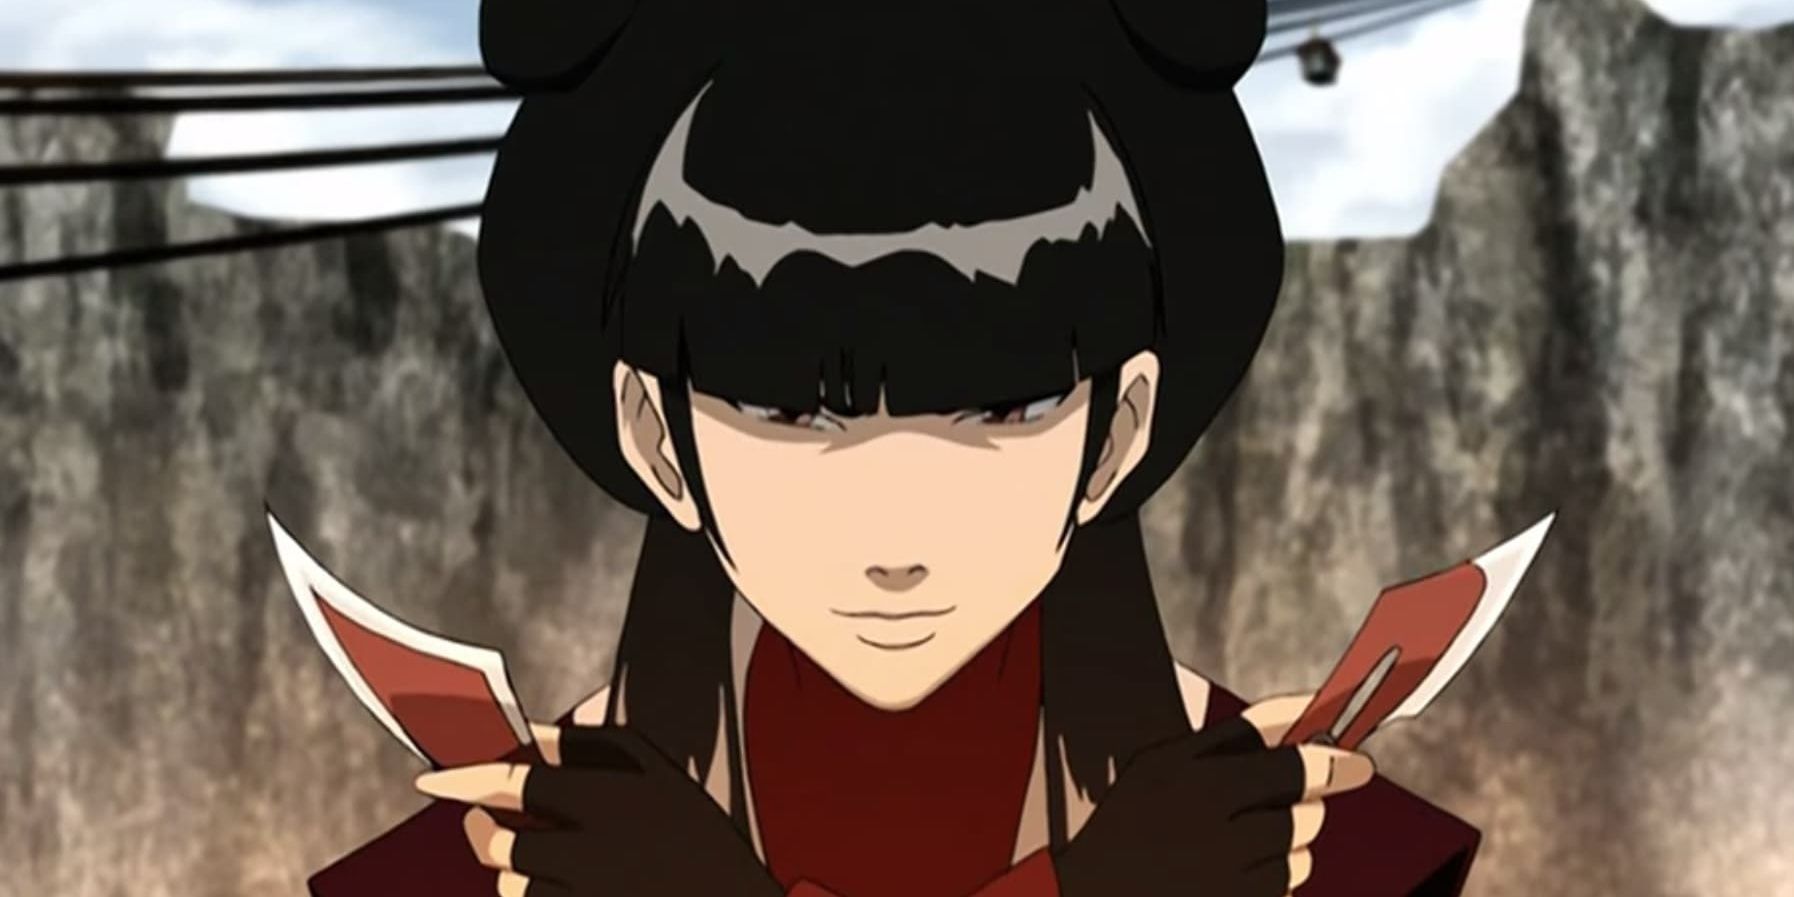 Mai looks serious in Avatar: The Last Airbender with her throwing knives.